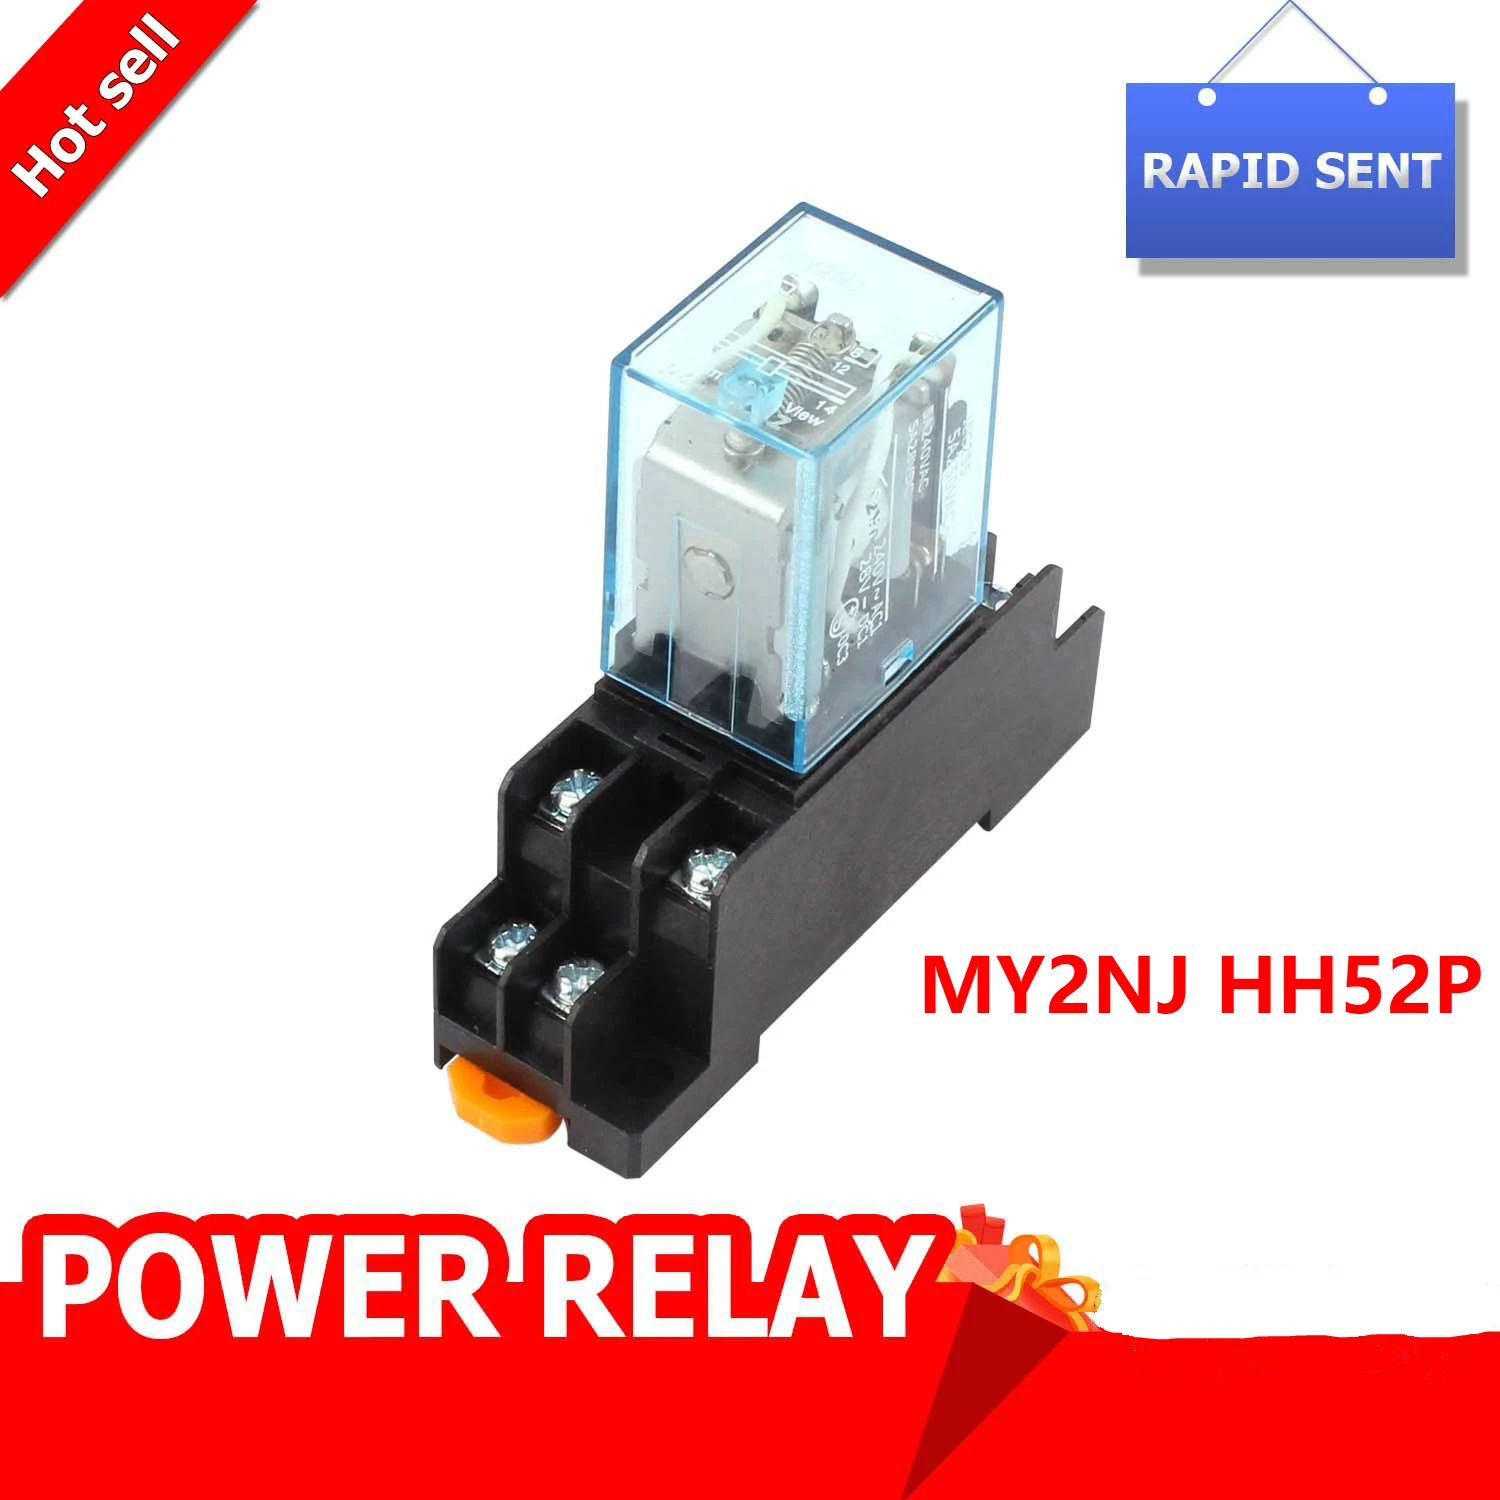 Electromagnetic Coil General DPDT Power Relay MY2NJ DPDT 8Pins HH52P Relays DC12V 24V AC220V Miniature Relay With Socket